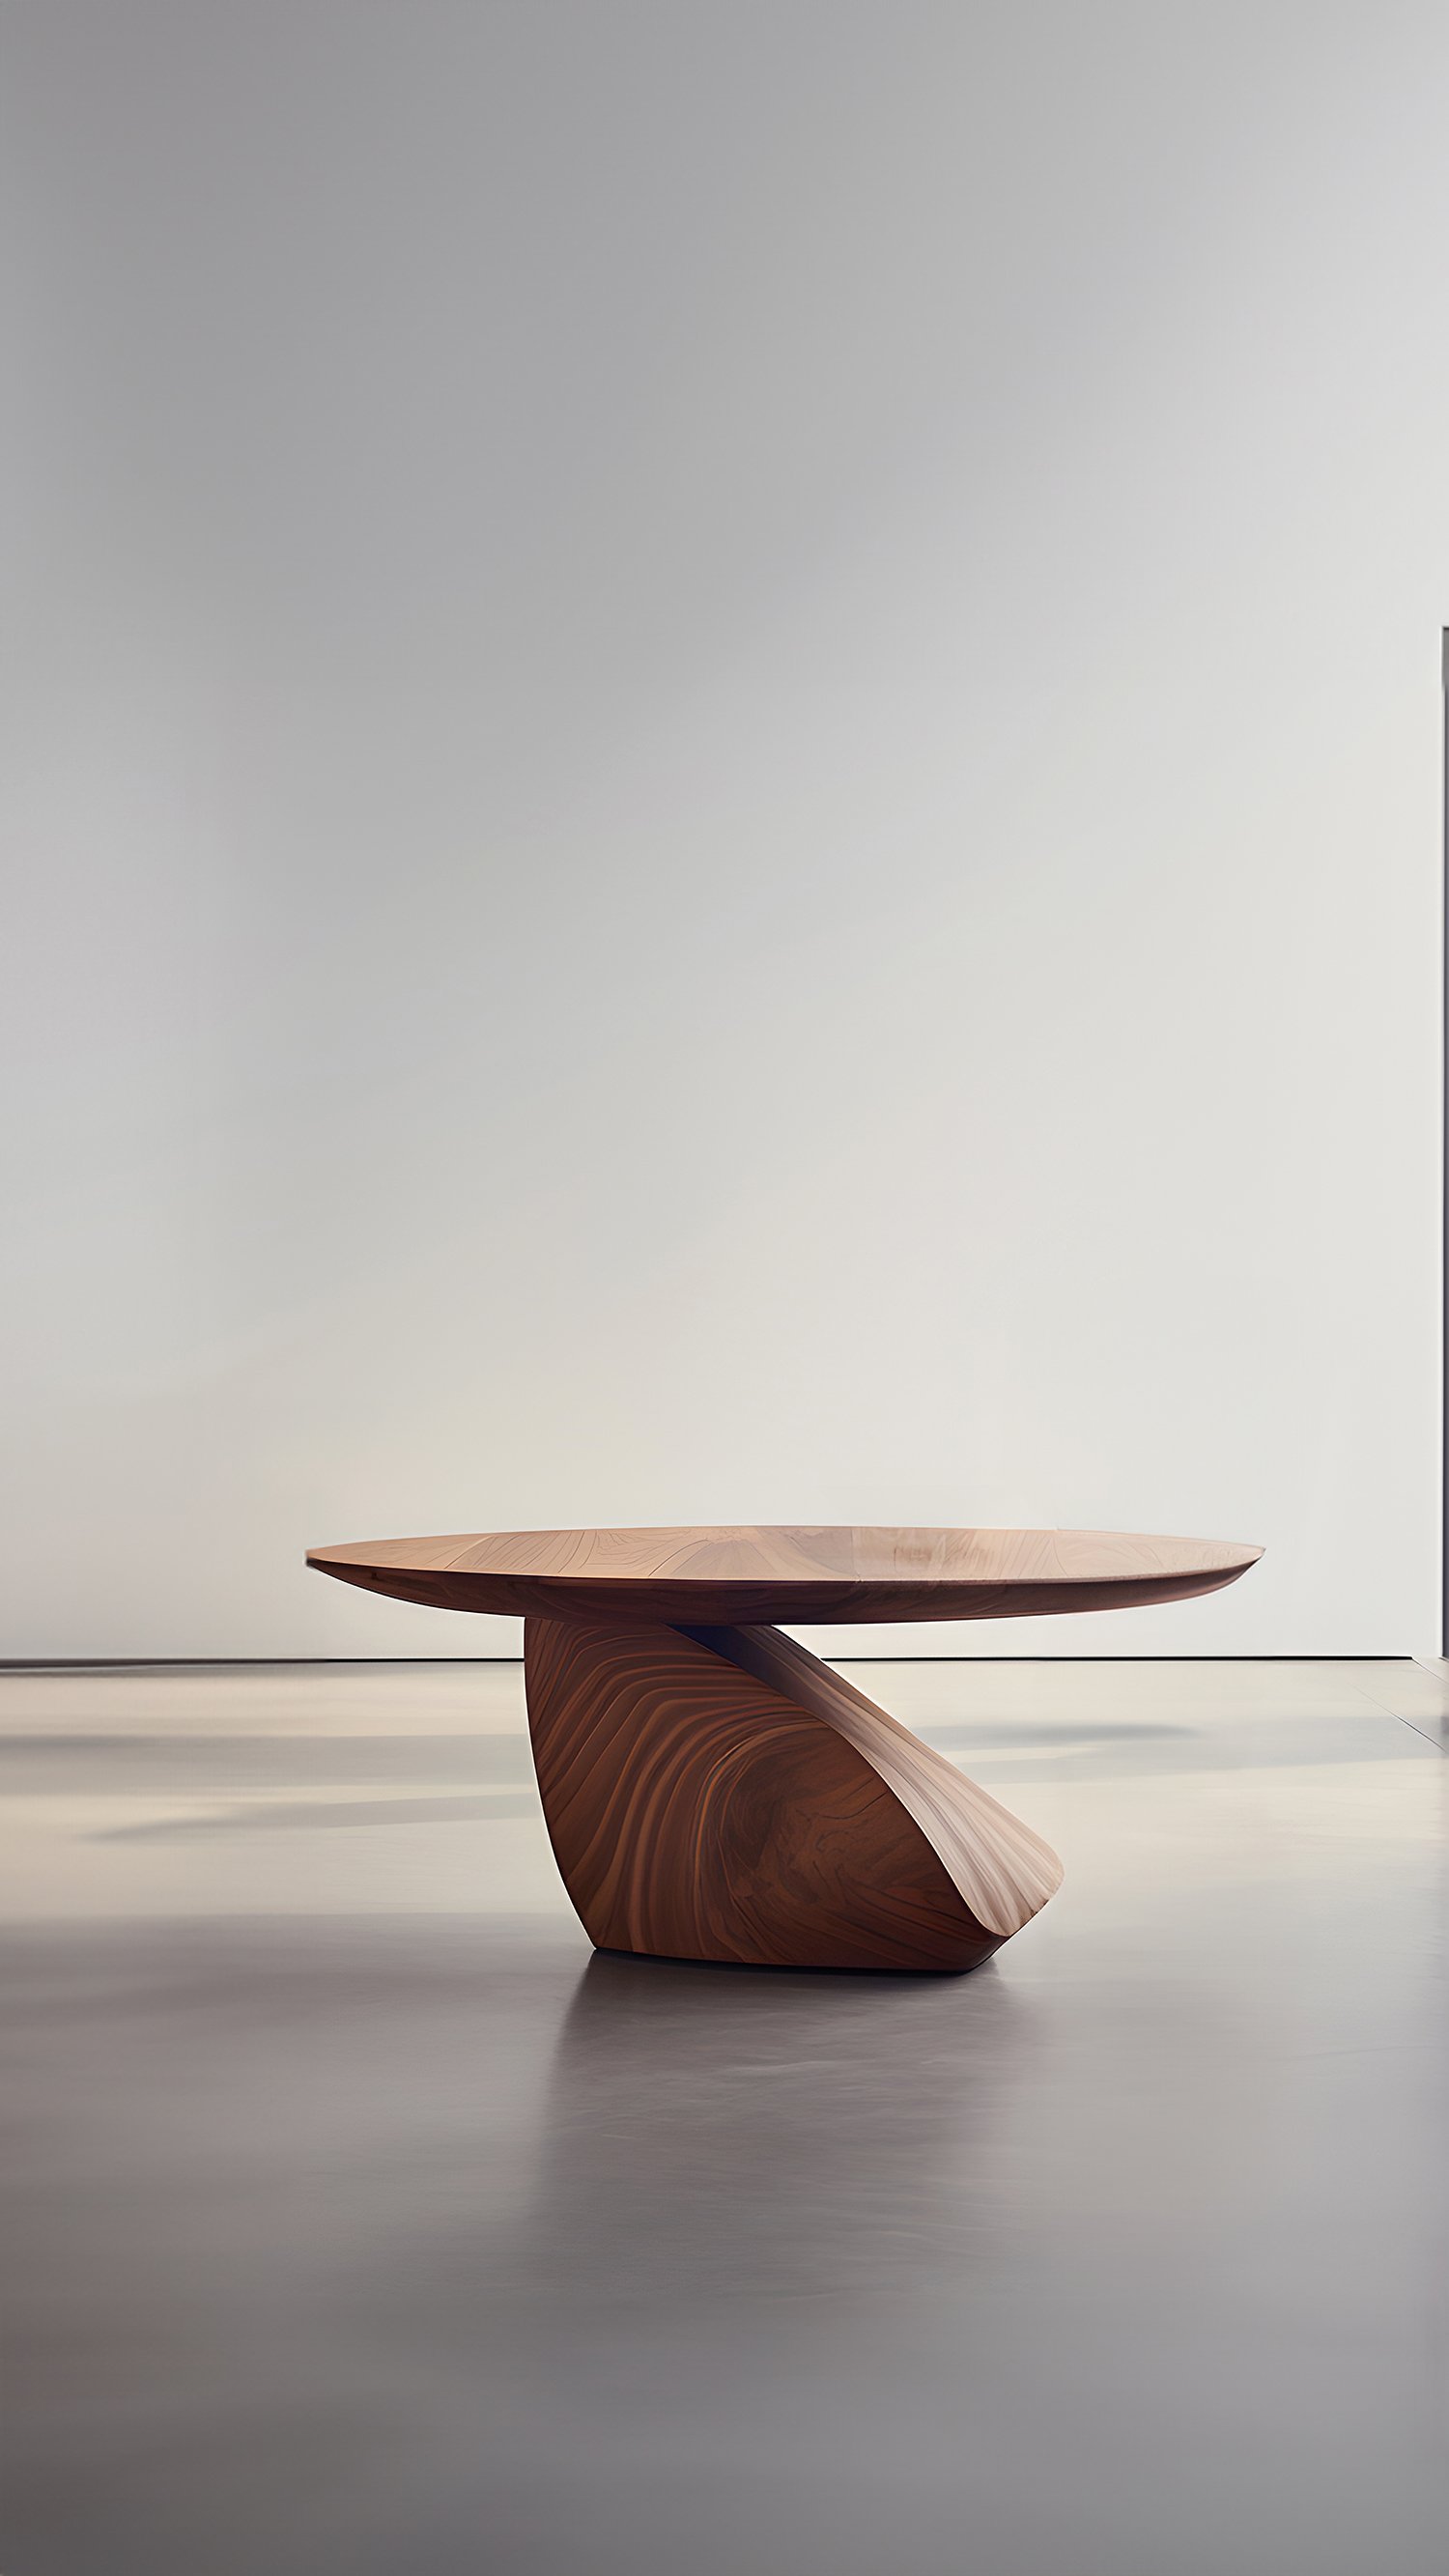 Sculptural Coffee Table Made of Solid Wood, Center Table Solace S31 by Joel Escalona — 6.jpg